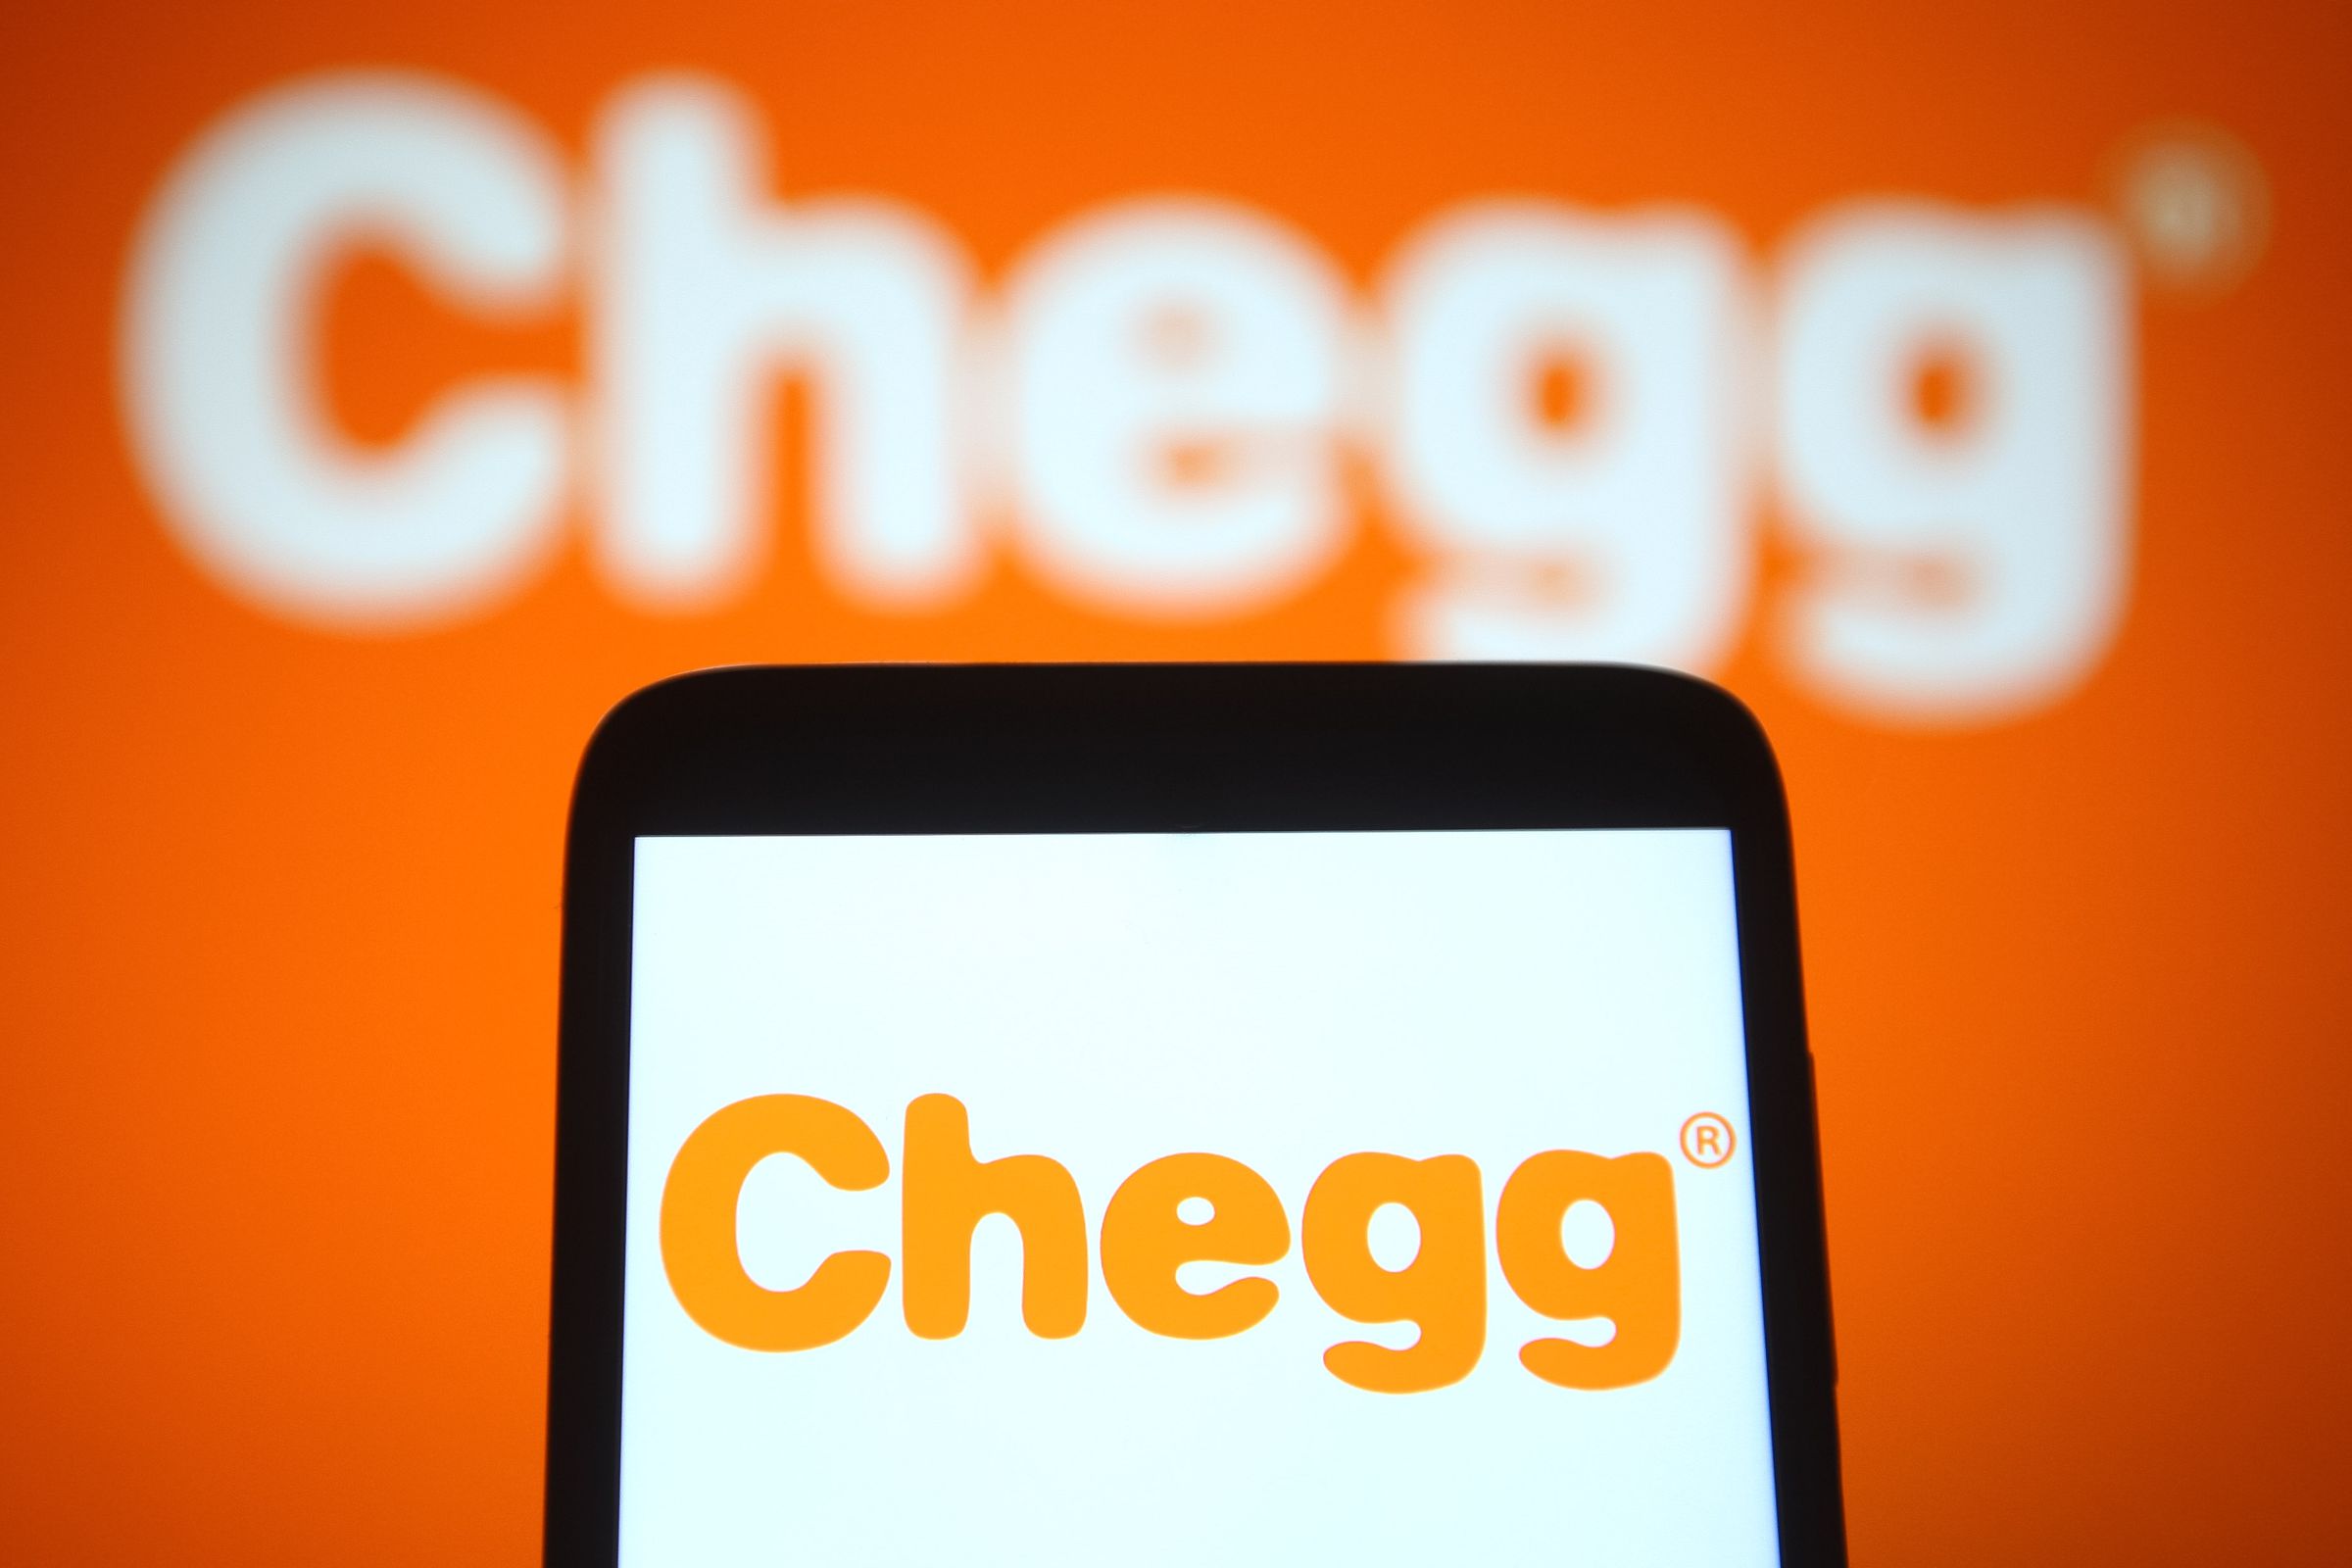 A Chegg, Inc. logo is displayed on both a mobile phone and on an orange wall behind the phone. 